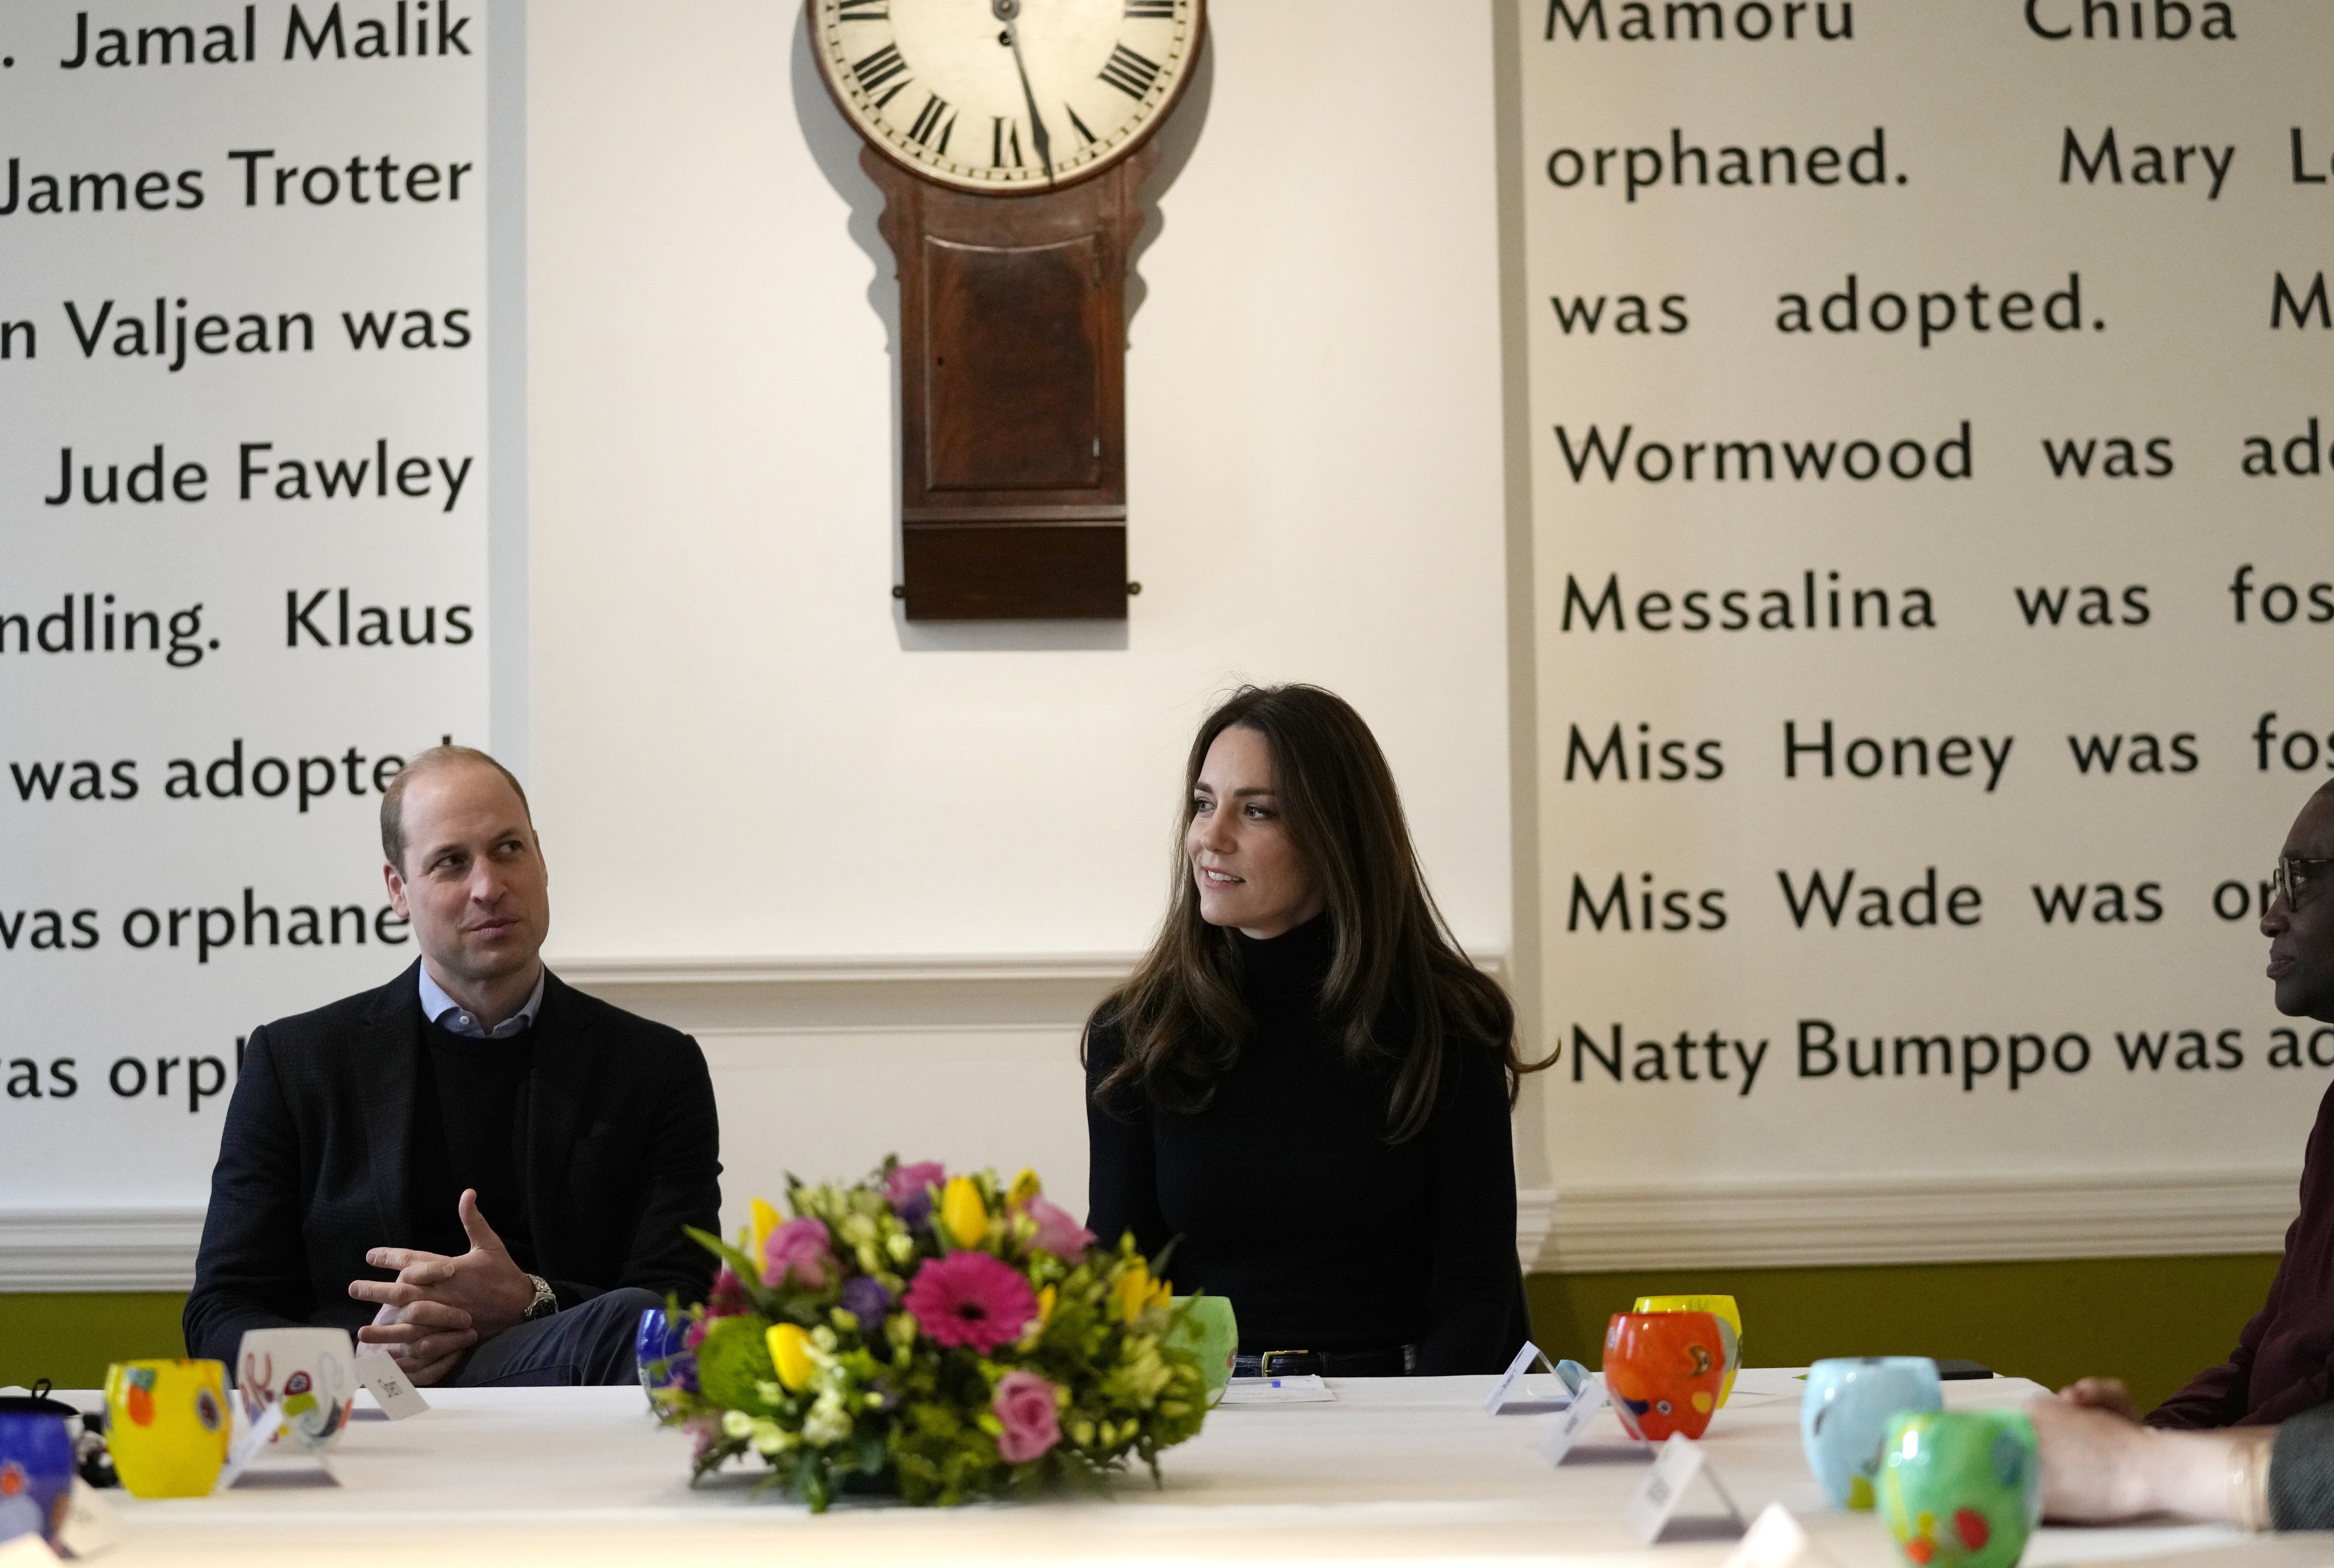 The Duke and Duchess of Cambridge join in a roundtable discussion during their visit (Alastair Grant/PA)